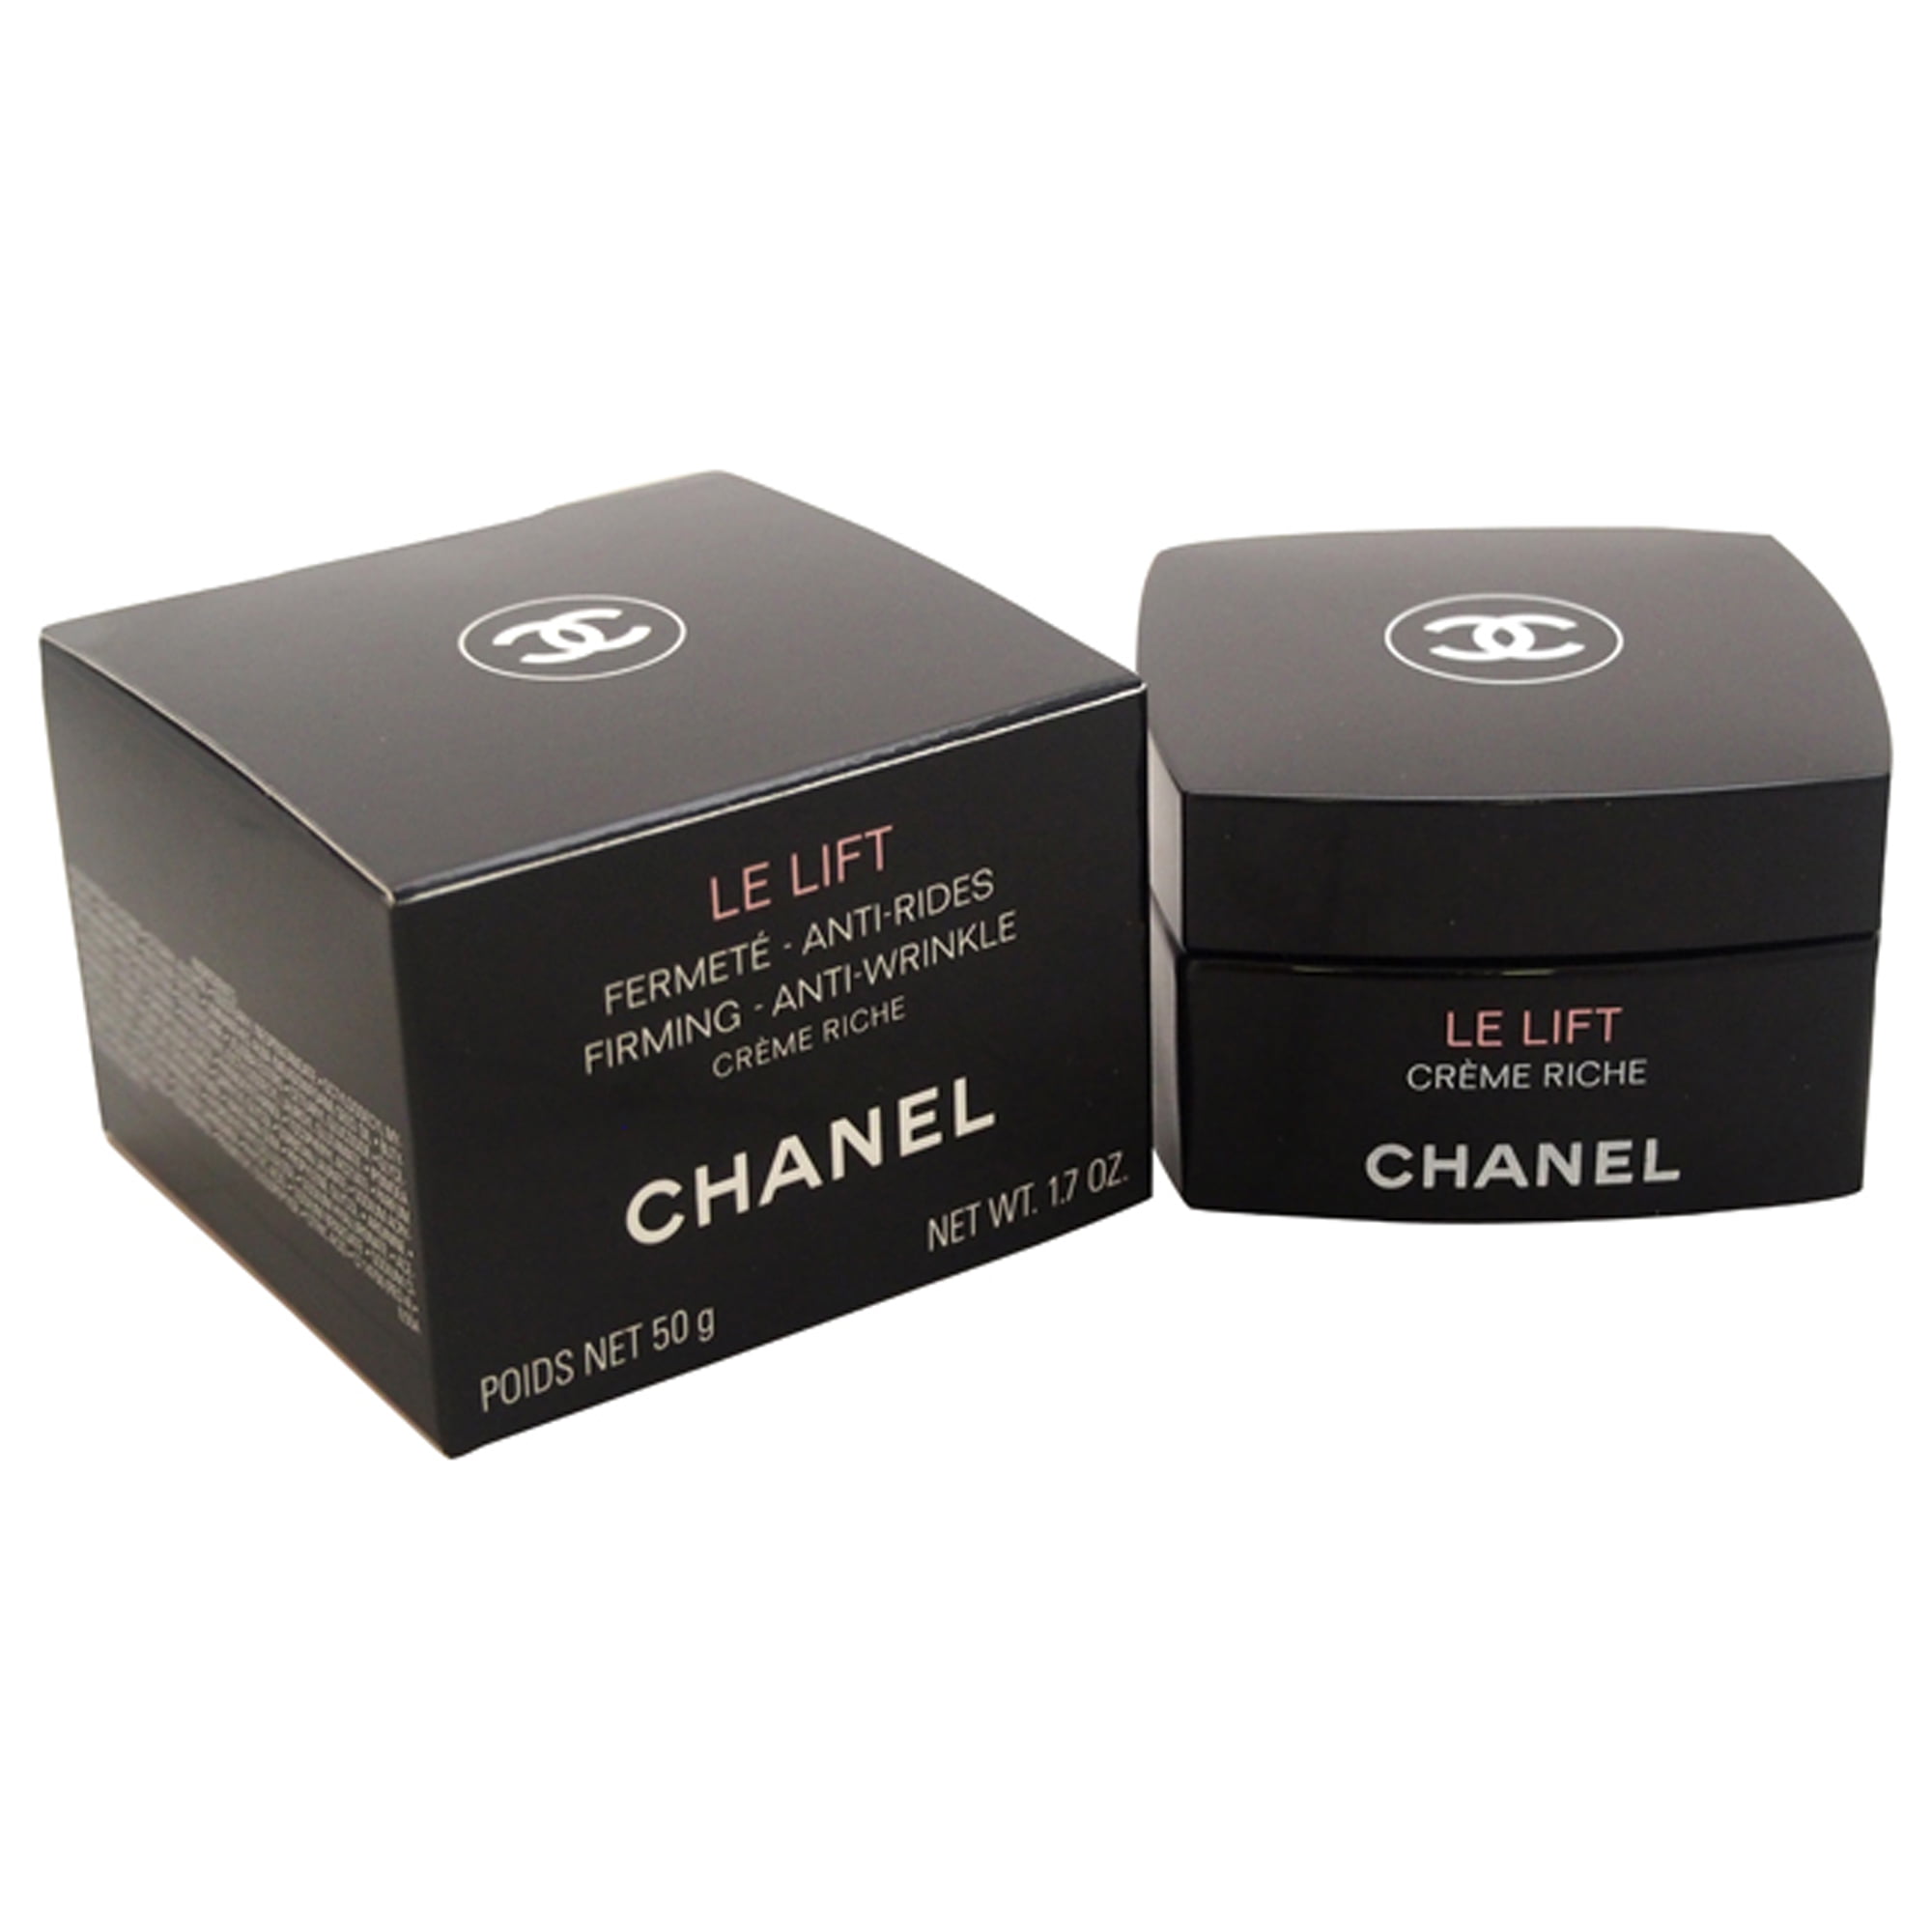 CHANEL - Le Lift Creme Riche Firming - Anti-Wrinkle Face Cream by ...